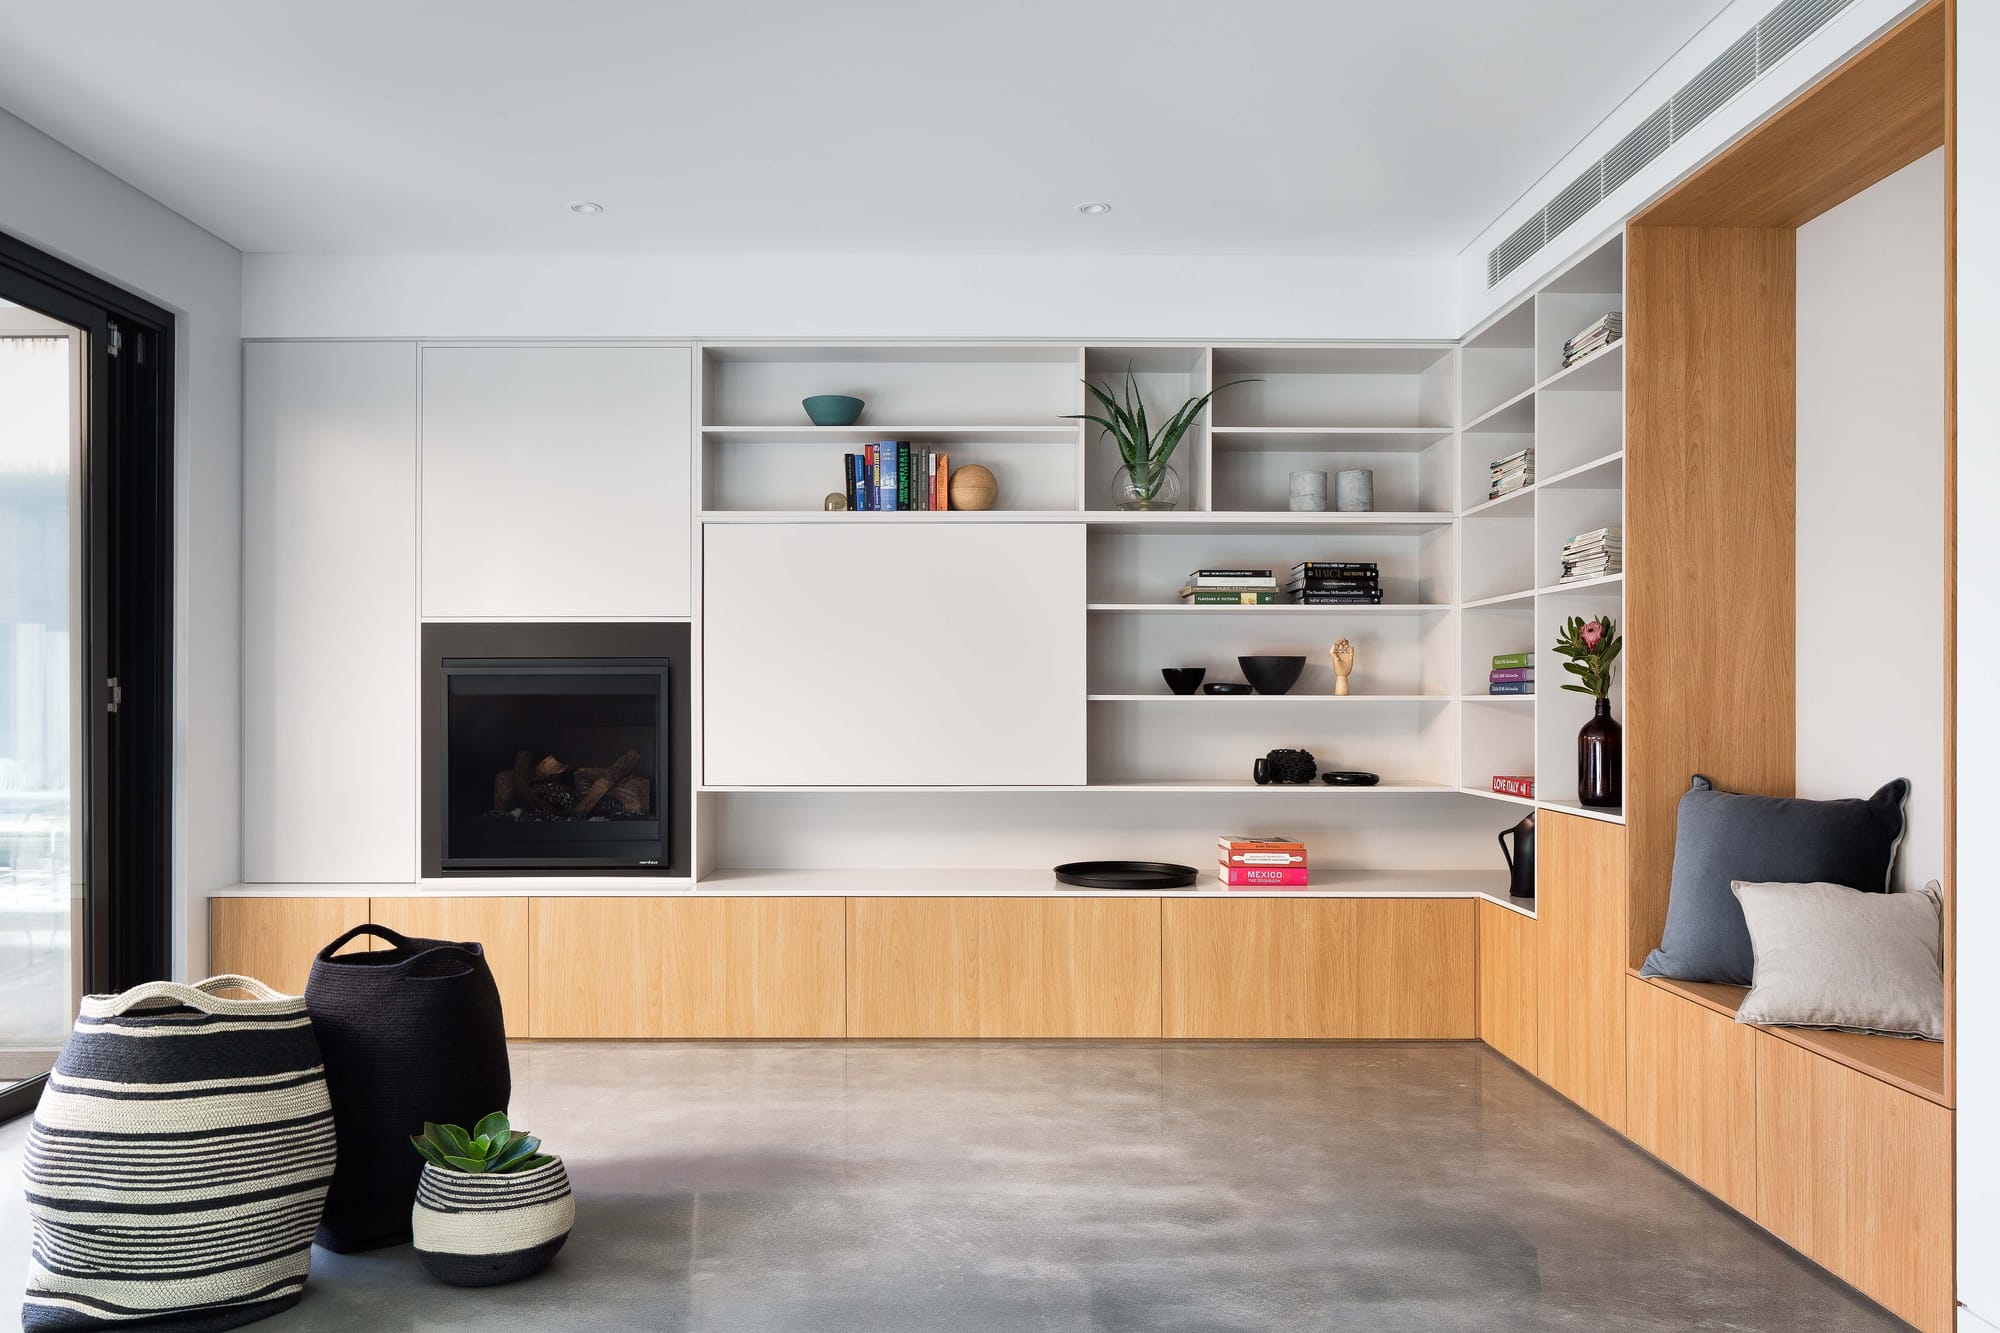 Cremorne House by Trethowan. Photography by Emily Bartlett. Residential living space with polished concrete floors and integrated timber joinery. Black fireplace to the left. 